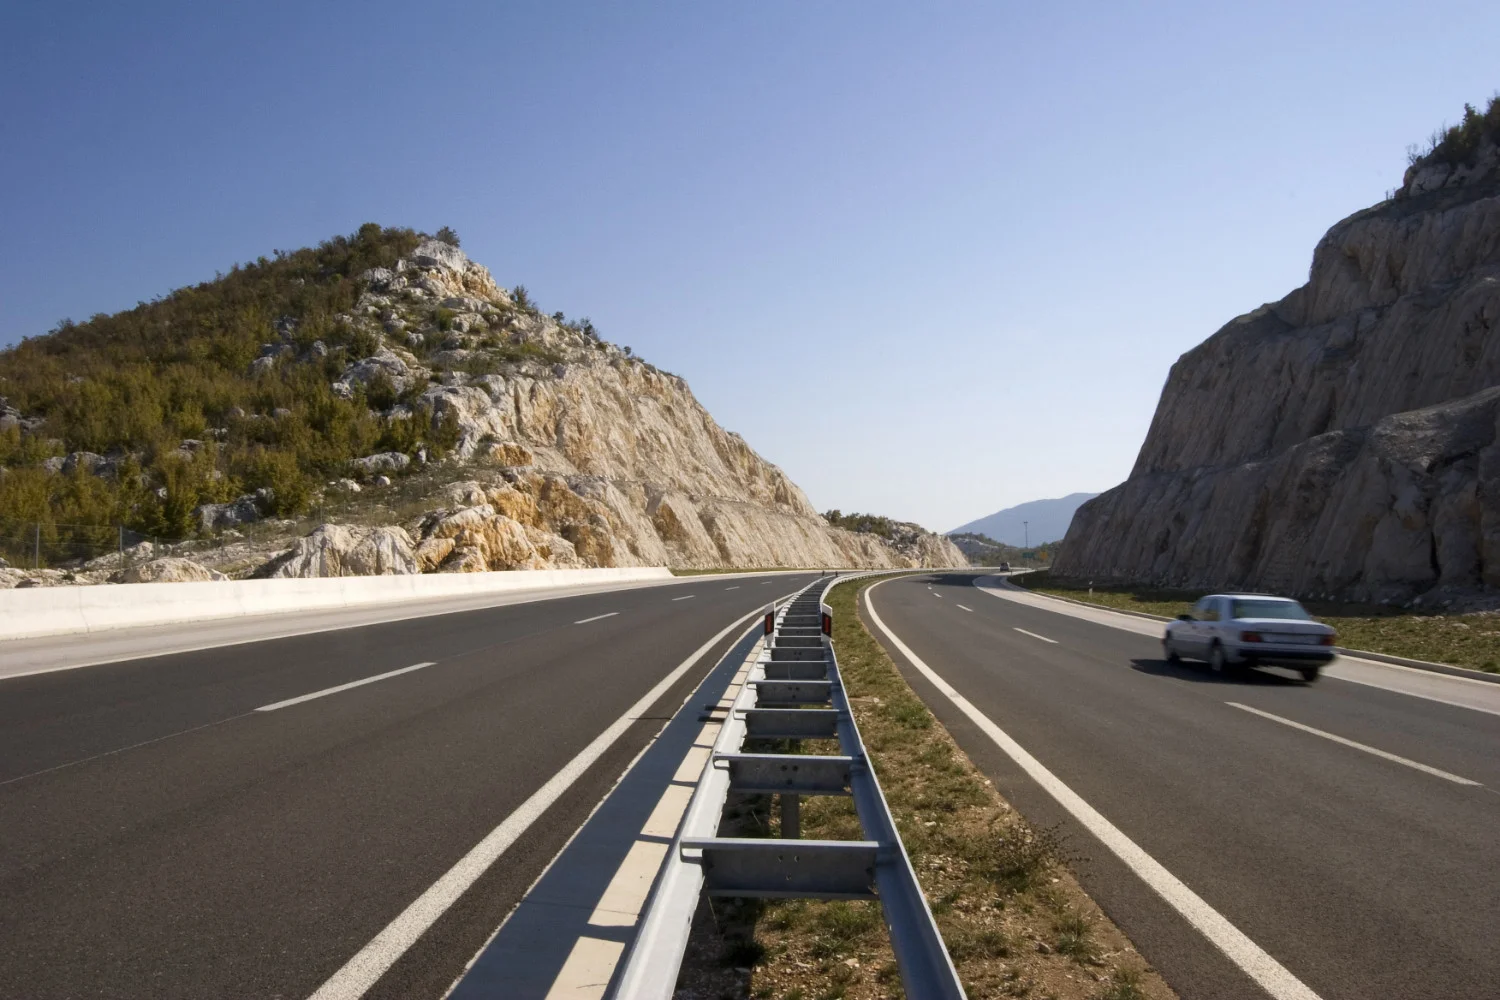 Croatian motorways are known for their high speed limits. The Croatia highway speed limit is 130 km/h.